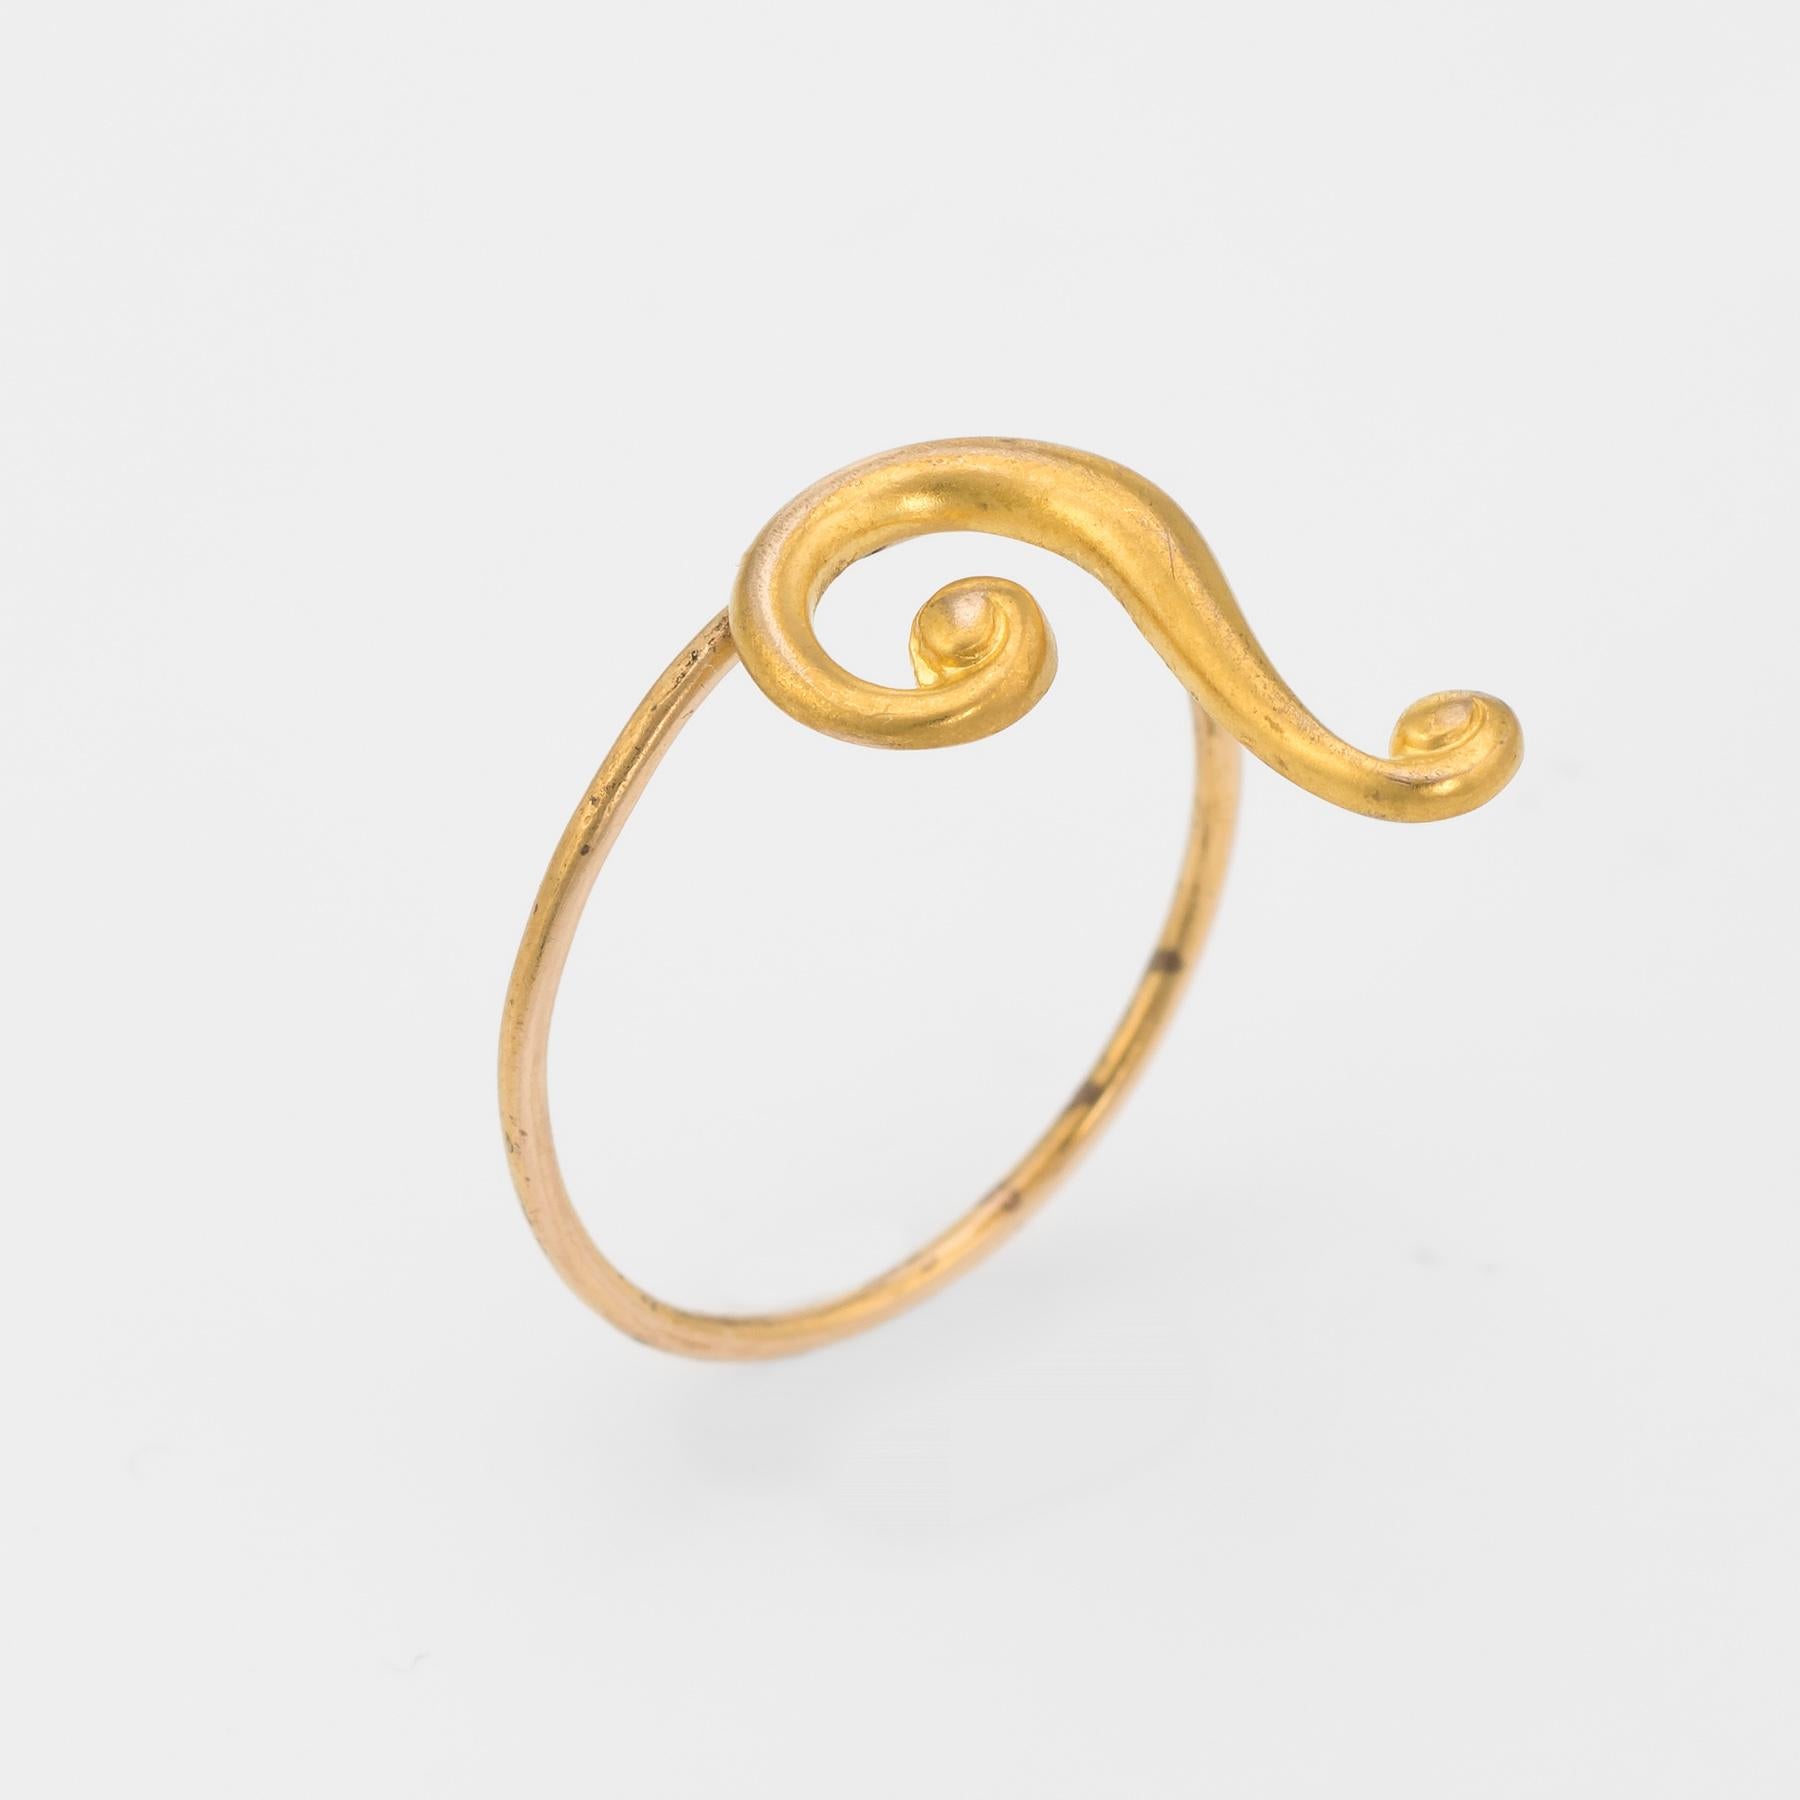 Originally an antique Victorian era stick pin (circa 1880s to 1900s), the question mark is crafted in 10 karat yellow gold. 

The question mark is mounted with the original stick pin. Our jeweler rounded the stick pin into a slim band for the